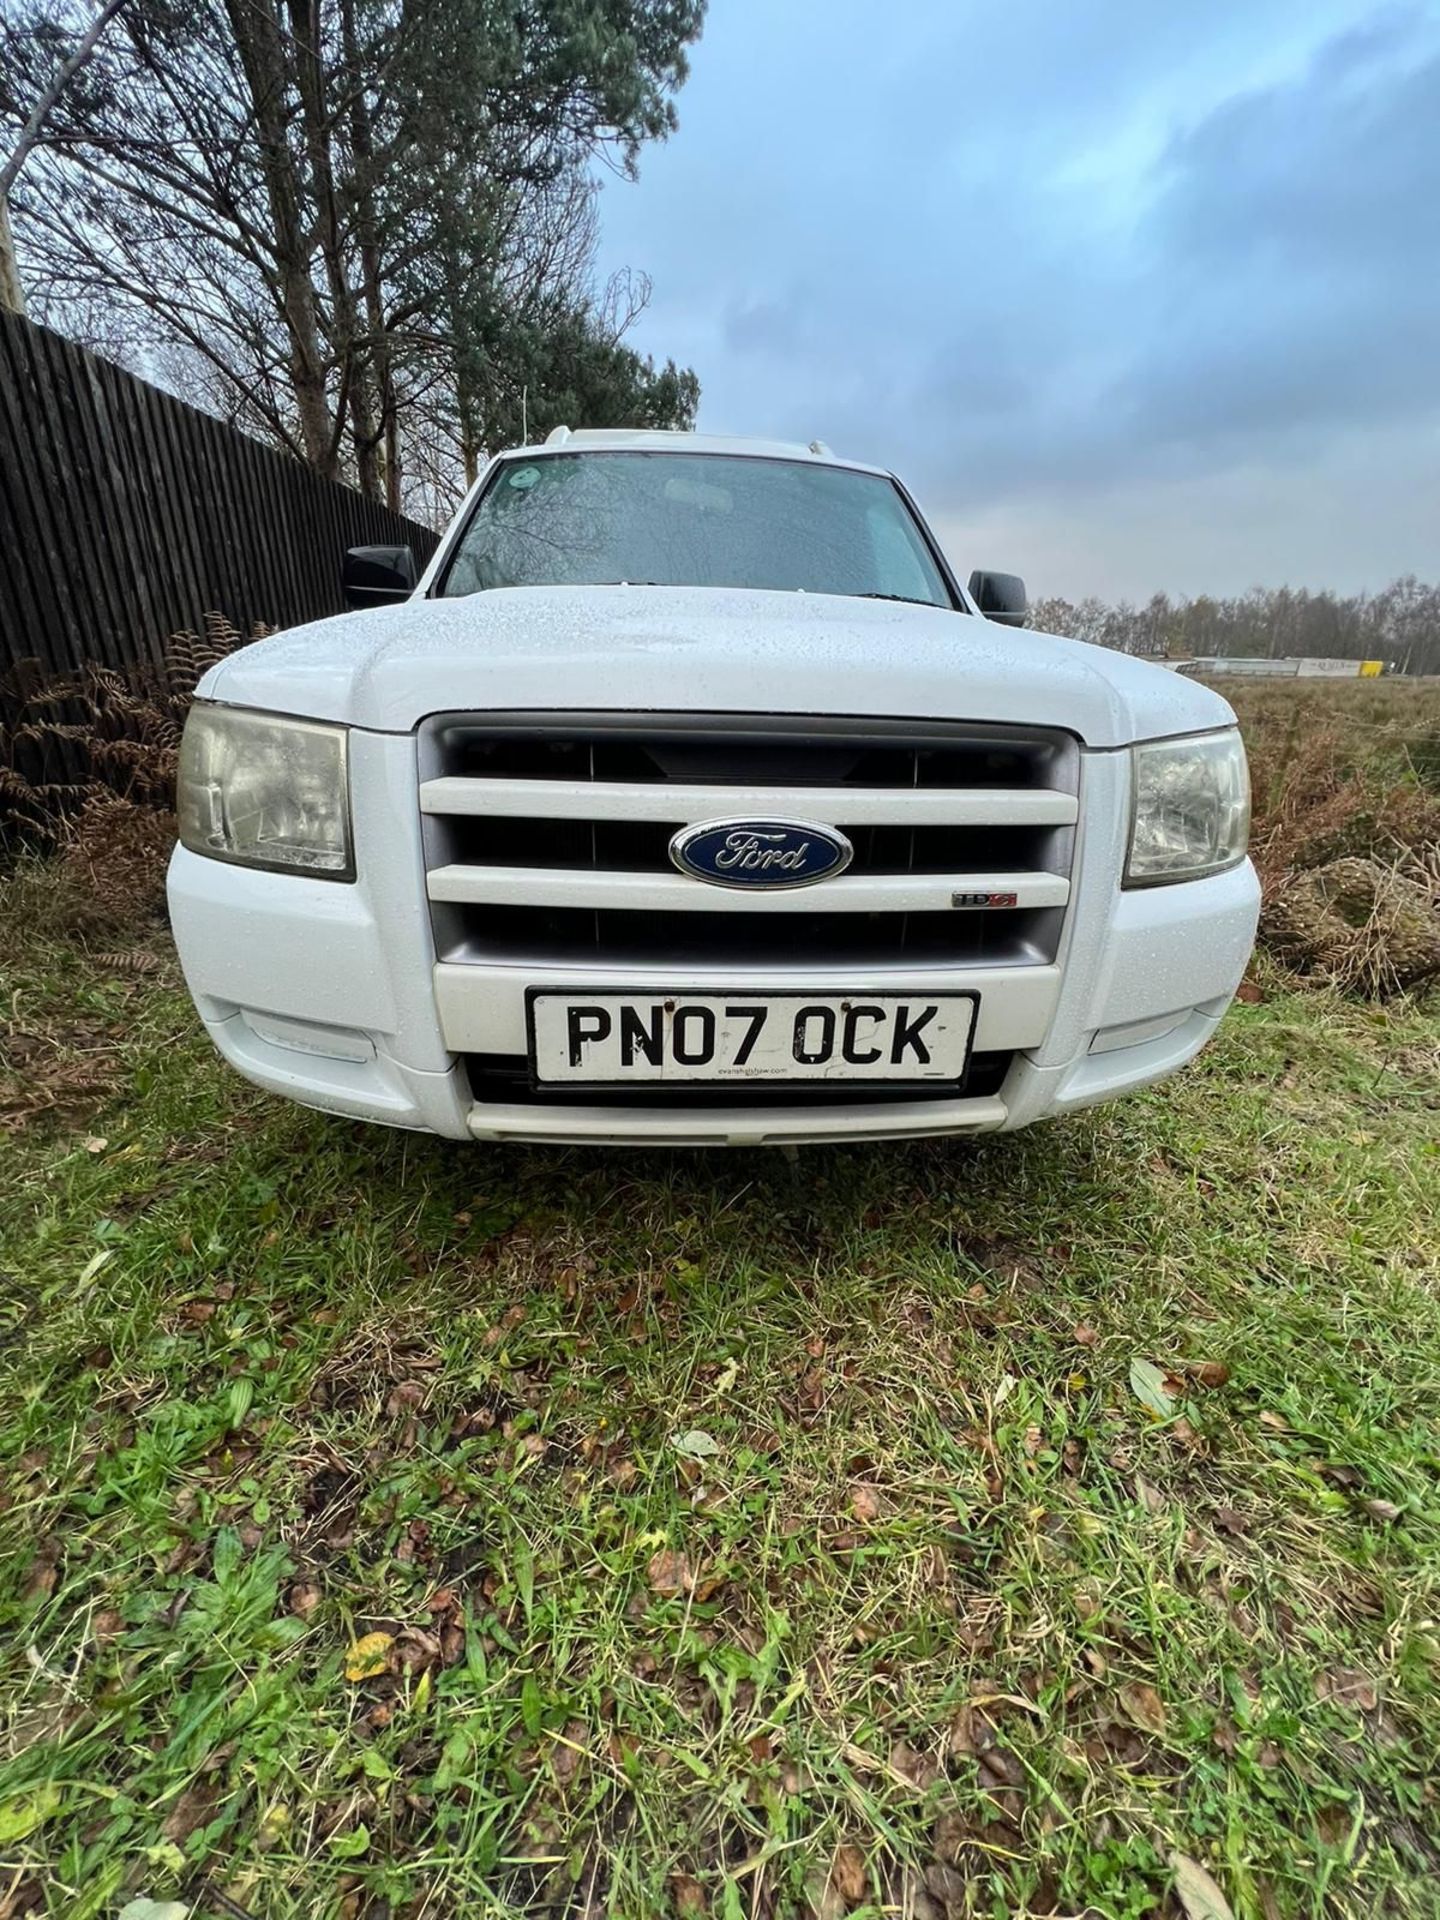 FORD RANGER SINGLE CAB PICKUP TRUCK 2WD EX NHS - Image 3 of 15